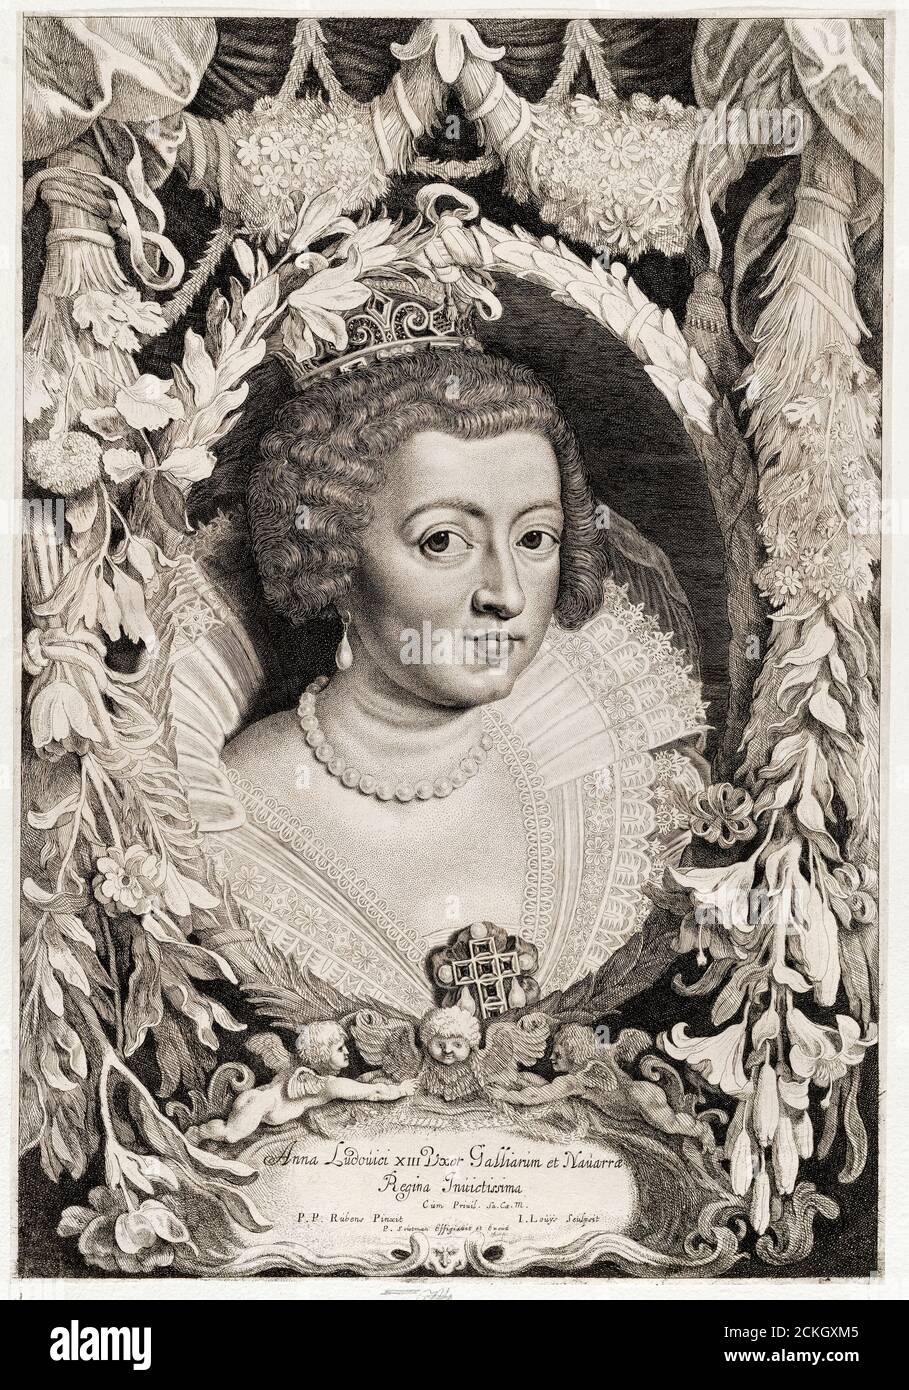 Anne of Austria (1601-1666), Queen consort of France, portrait engraving by Jacob Louys, after Rubens, circa 1650 Stock Photo